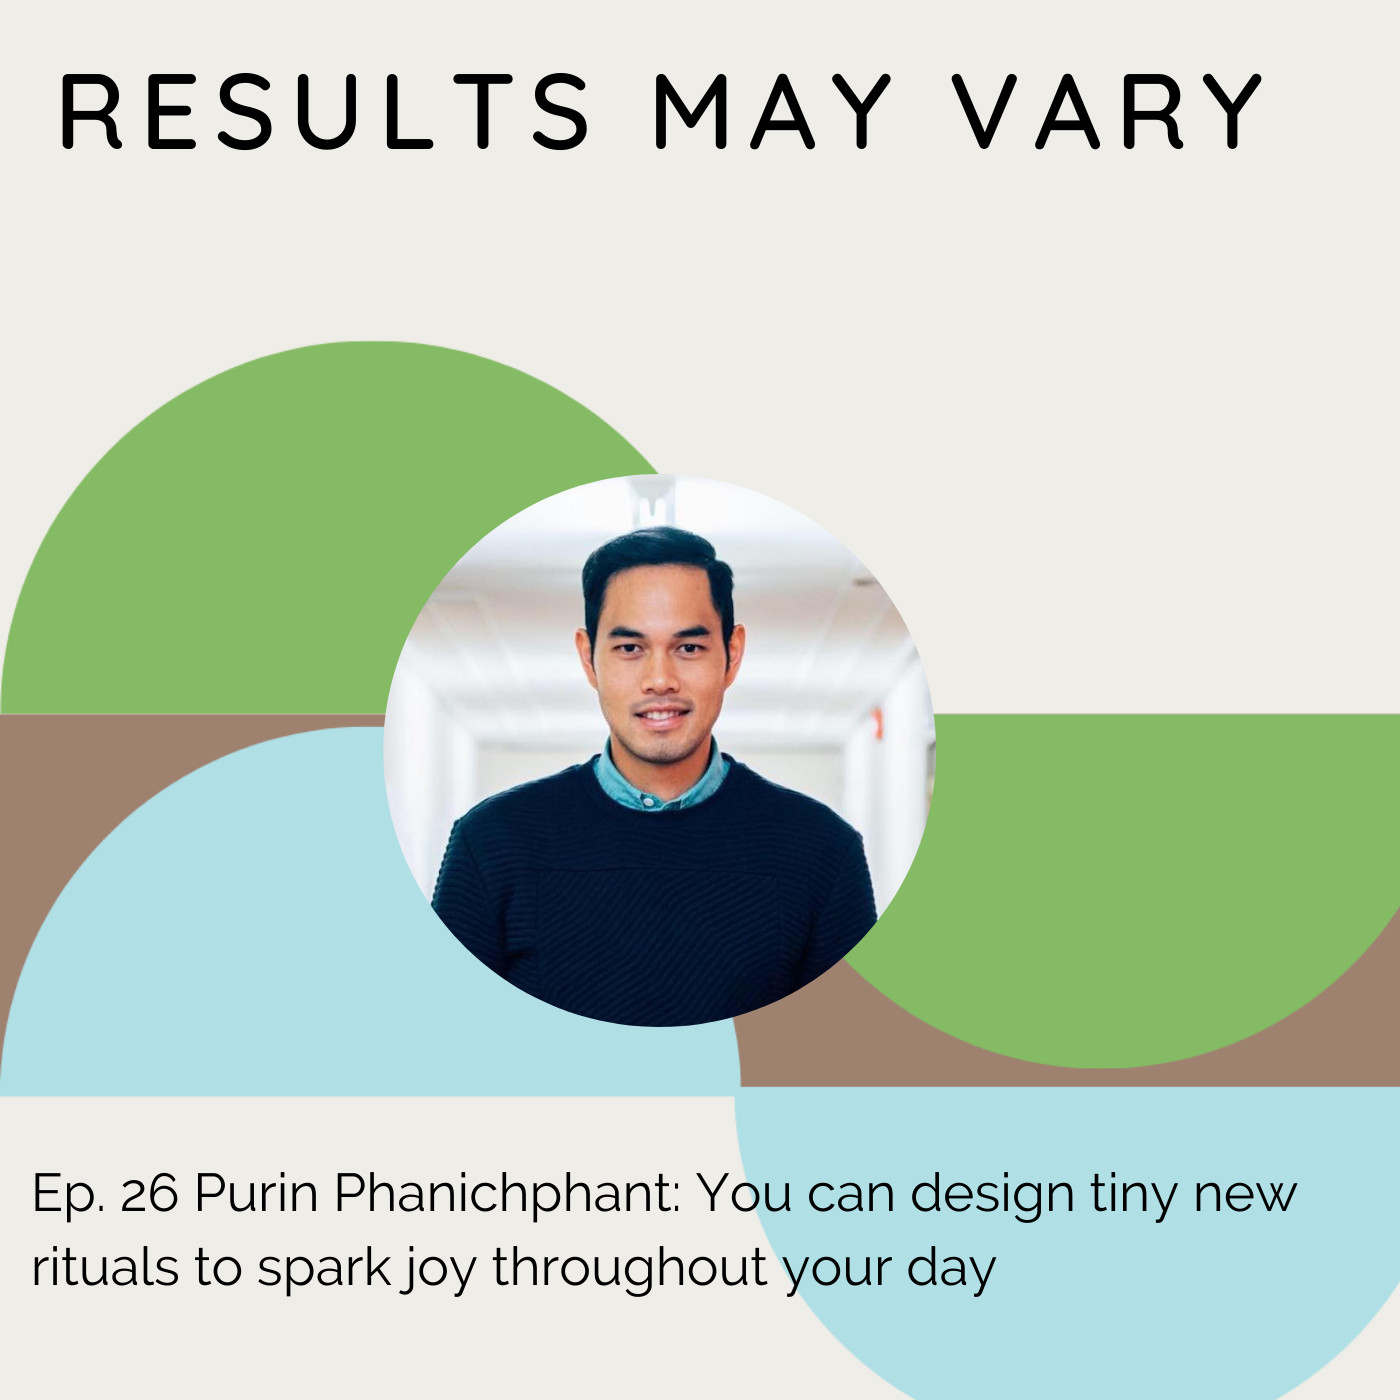 RMV 26 Purin Phanichphant: You Can Design Tiny New Rituals To Spark Joy Throughout Your Day